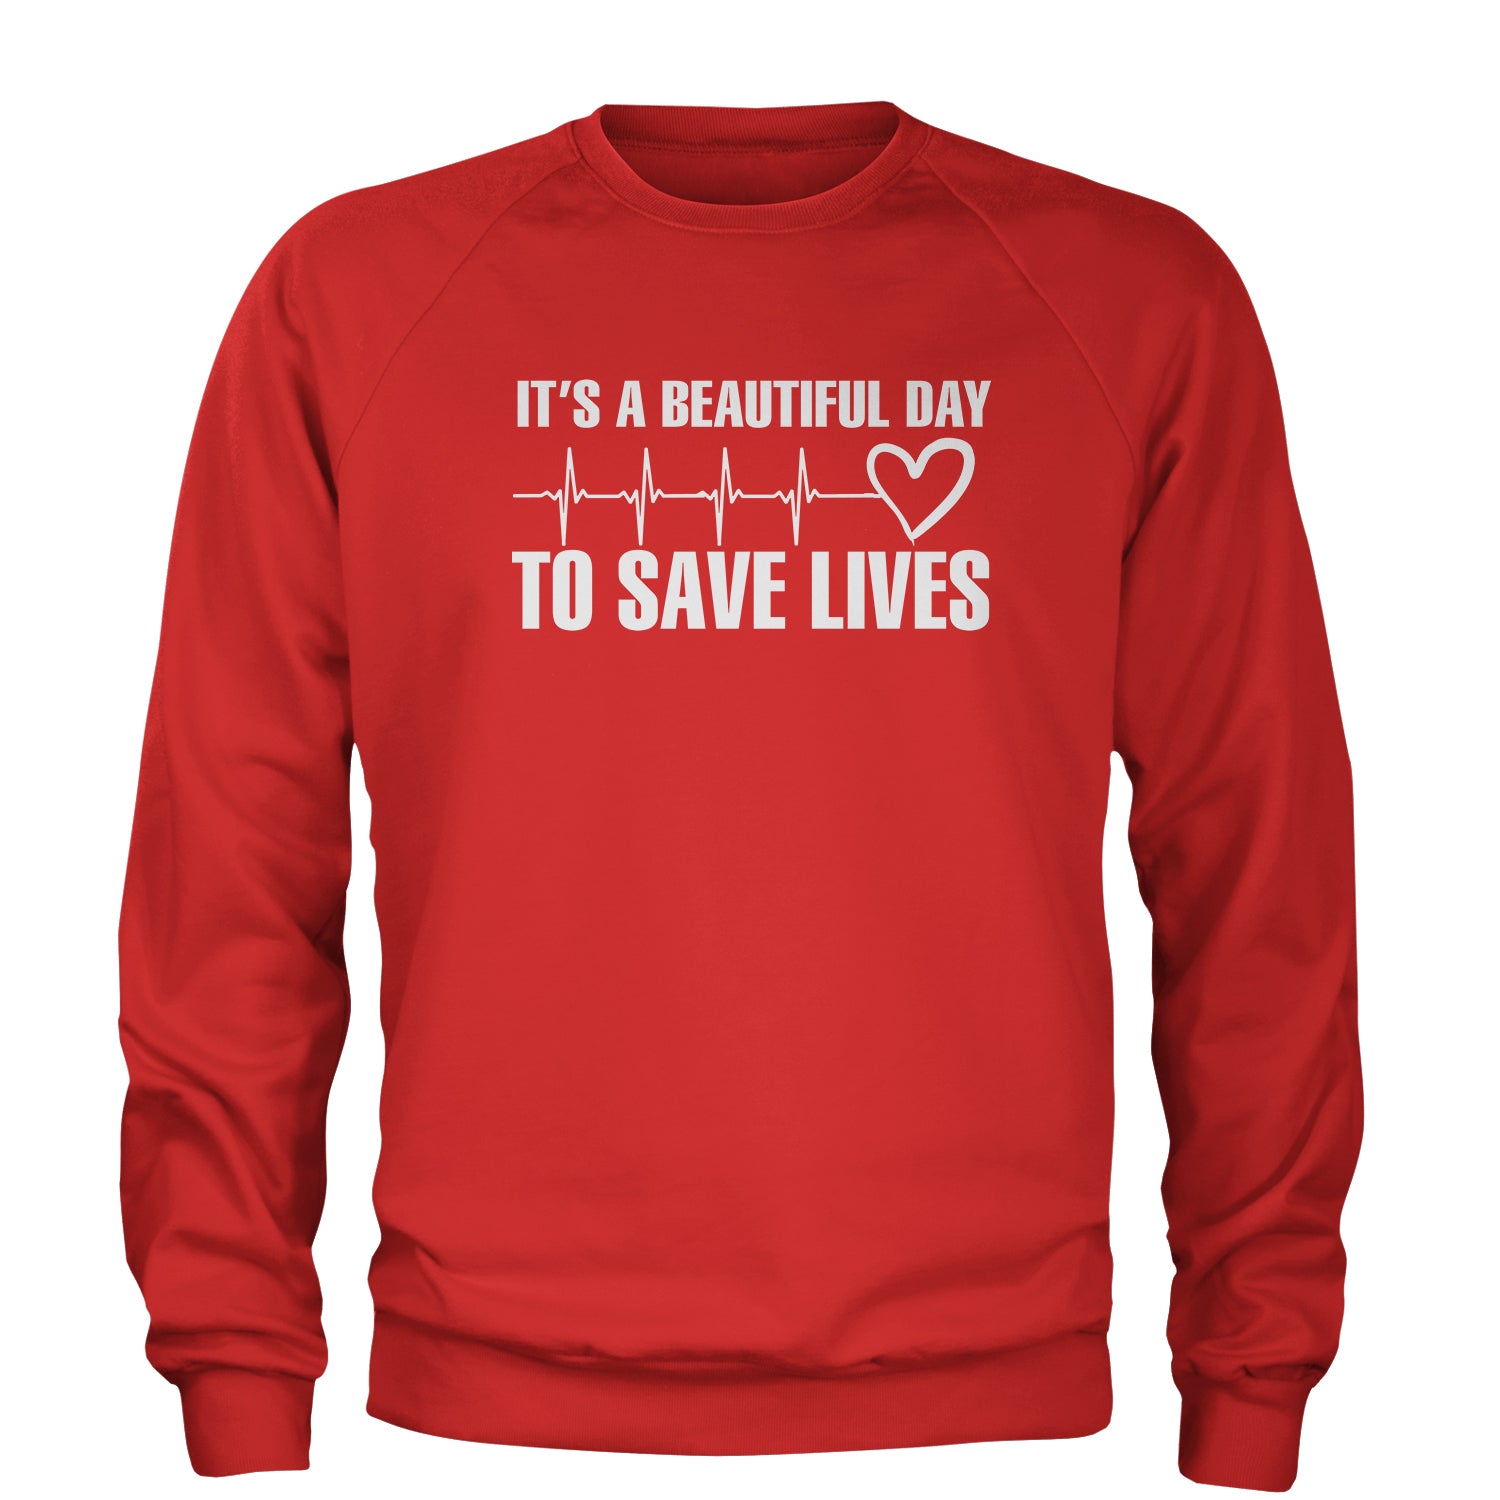 It's A Beautiful Day To Save Lives (White Print) Adult Crewneck Sweatshirt #expressiontees by Expression Tees